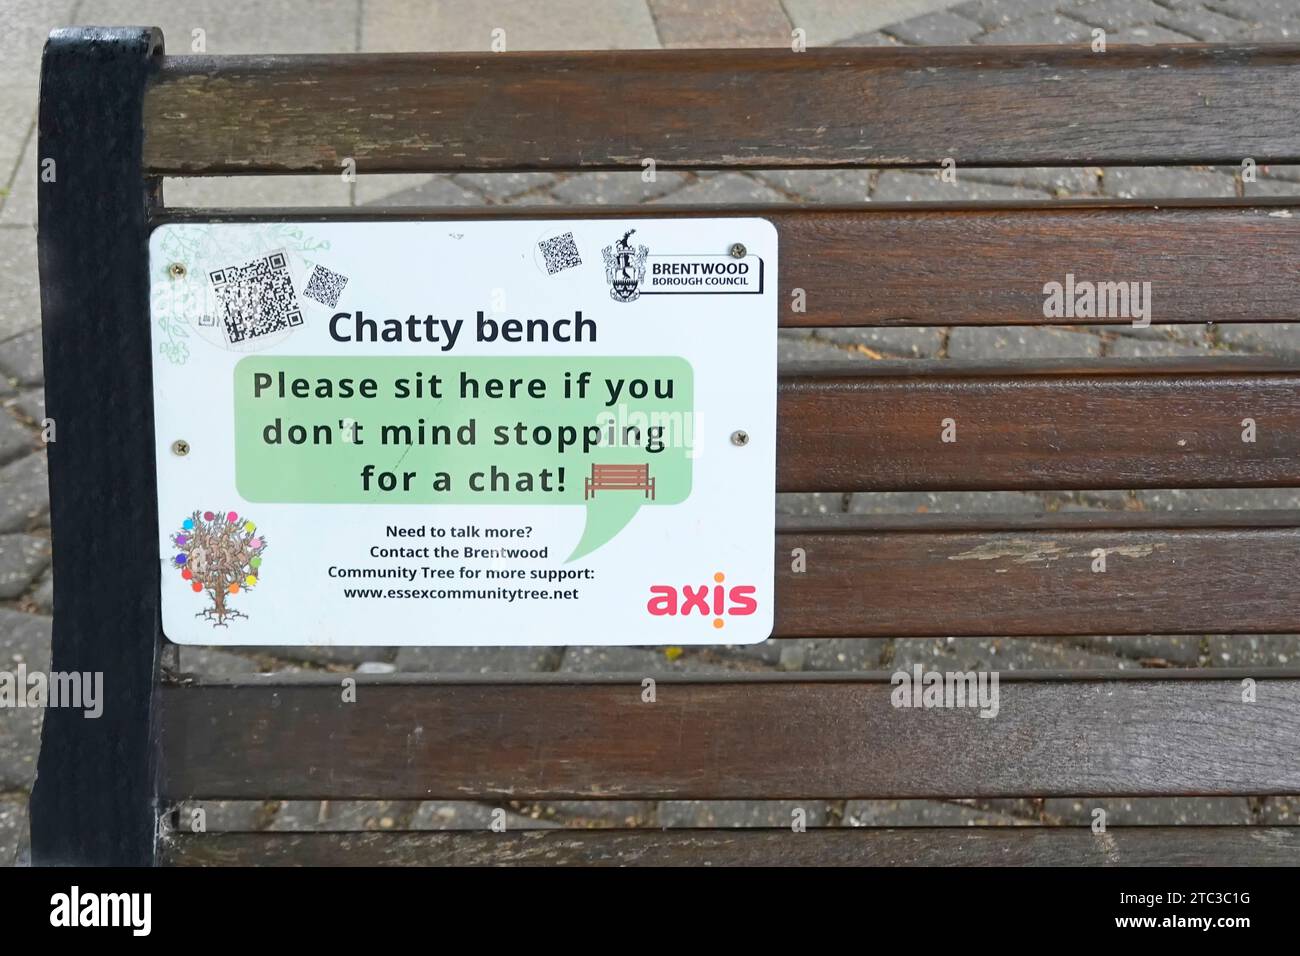 Chatty bench sign installed on park bench in a suburban town centre for conversations with anyone who comes along to talk Brentwood Essex England UK Stock Photo